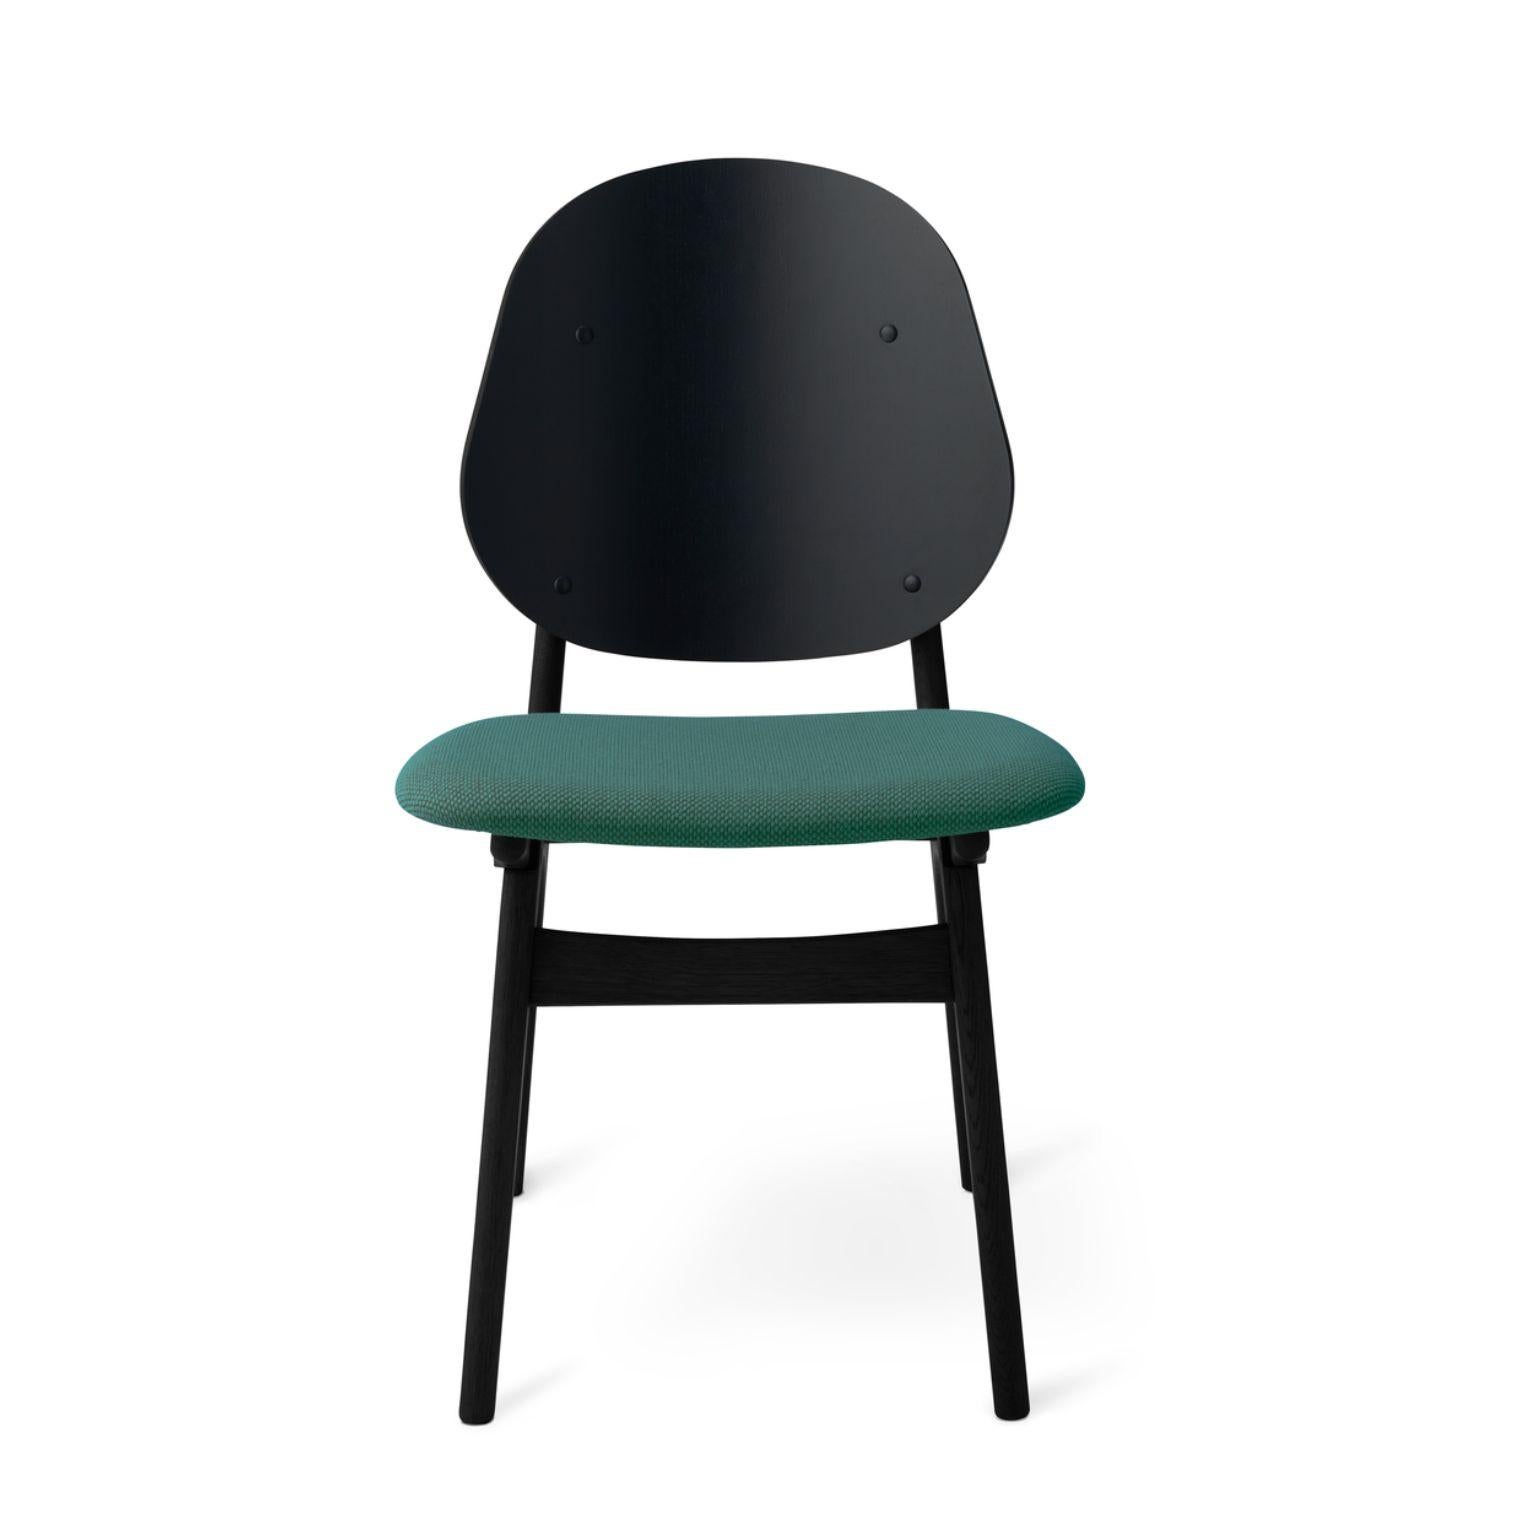 Noble chair black lacquered beech hunter green by Warm Nordic
Dimensions: D55 x W47 x H 85 cm
Material: Black lacquered solid beech, Veneer seat and back, Textile or leather upholstery.
Weight: 7.5 kg
Also available in different colours and